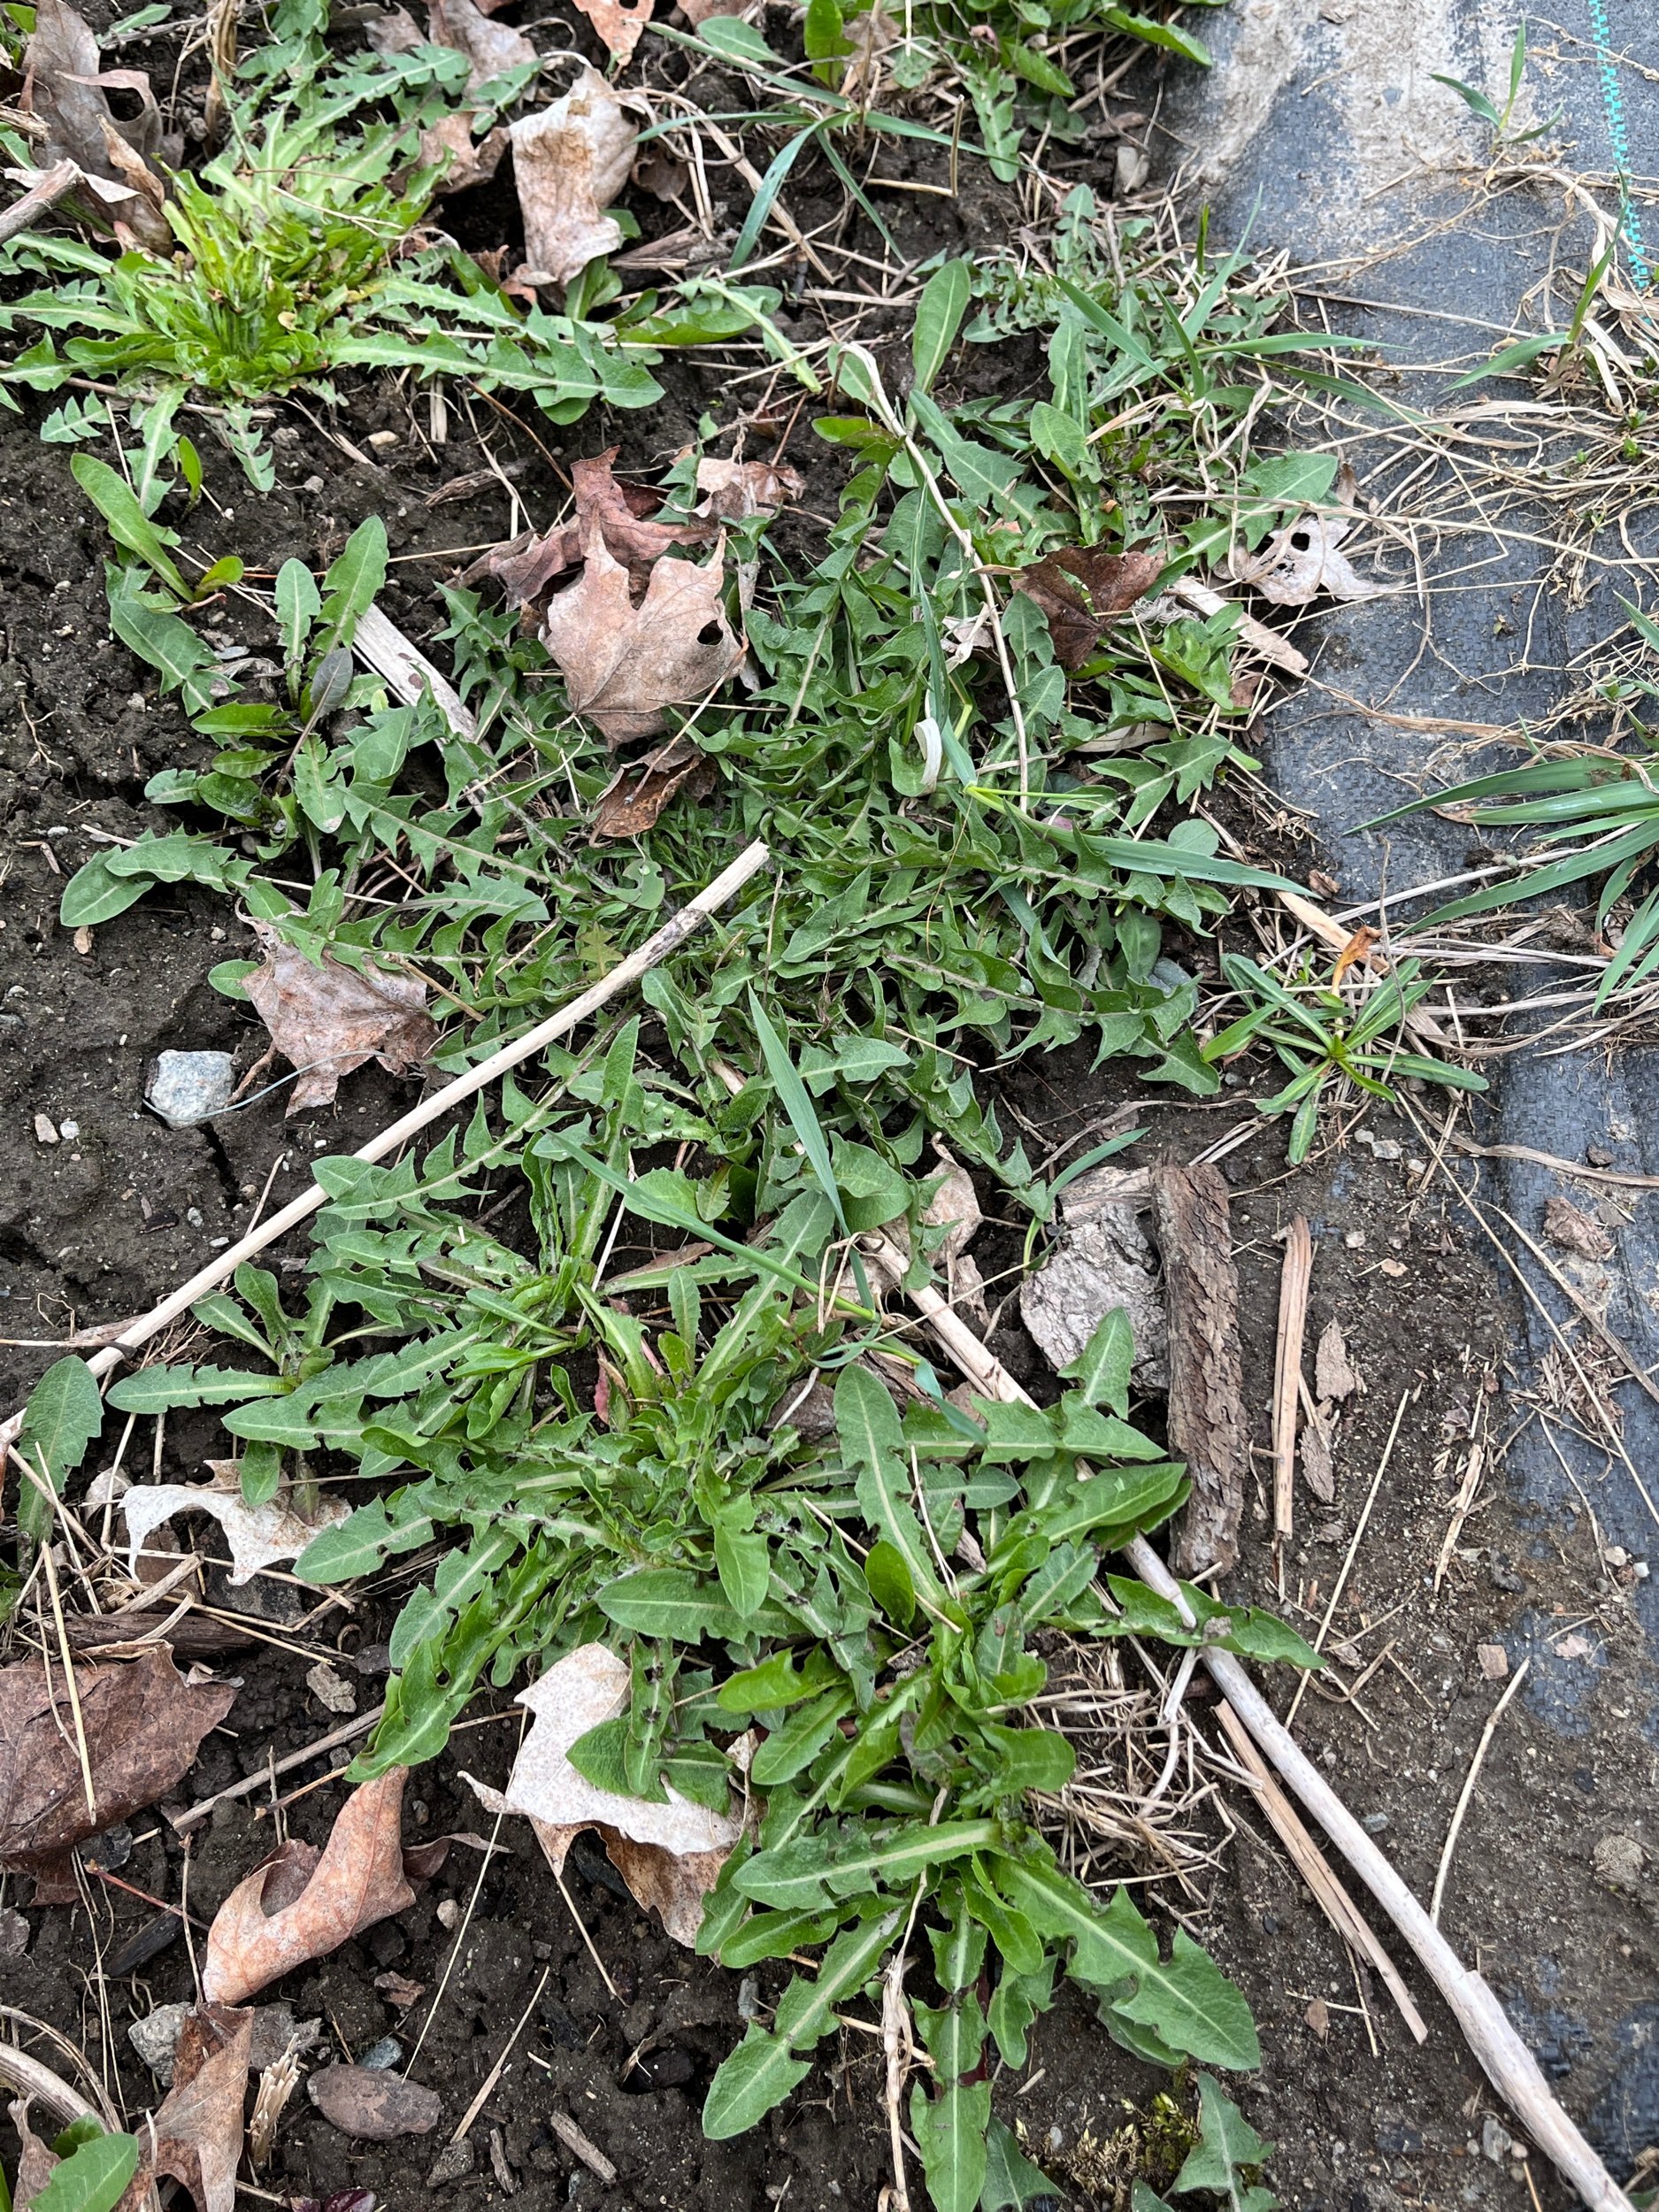  The dandelions are all over one of the garden beds, but I use them for green mulch along with plantain, so it is good to see them. They don’t need to be weeded. 